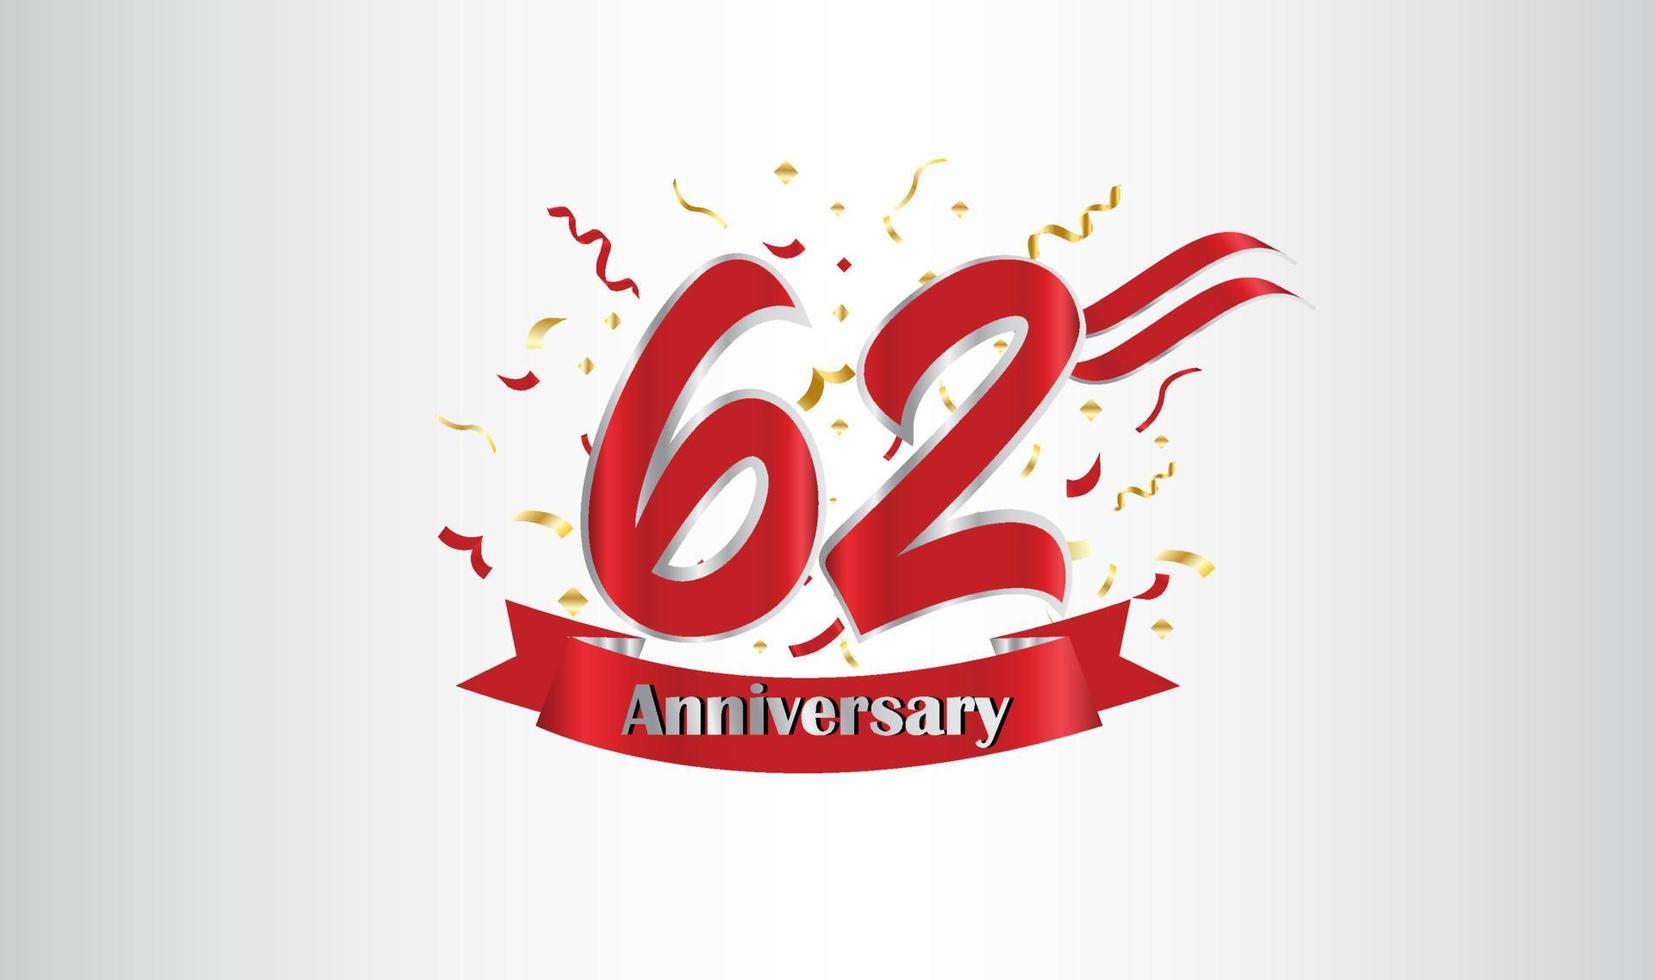 Anniversary celebration background. with the 62nd number in gold and with the words golden anniversary celebration. vector